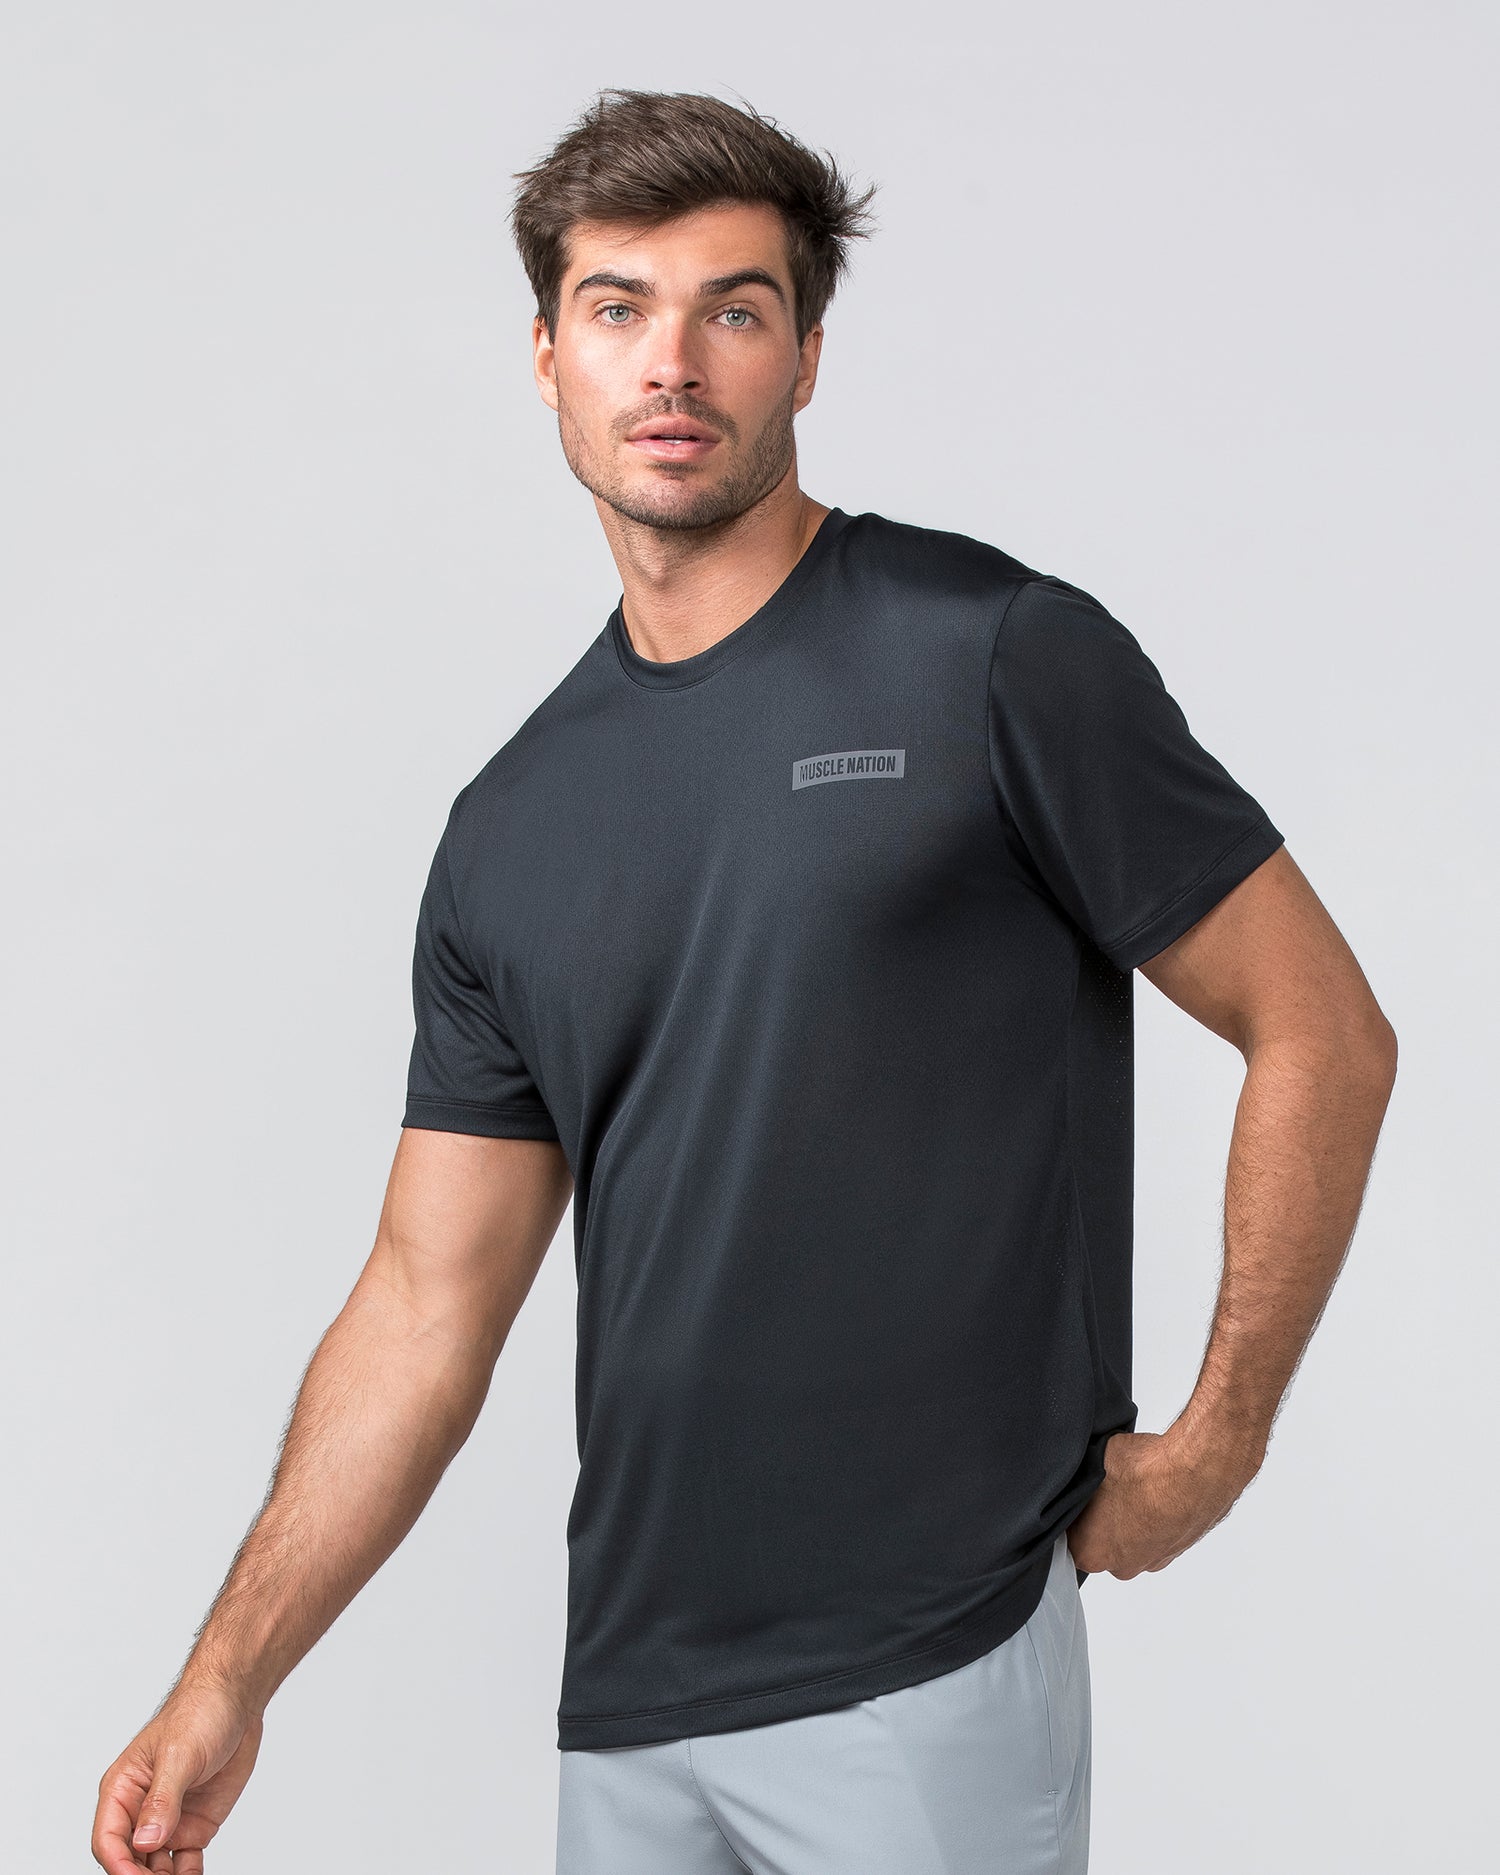 Relaxed Active Tee - Black